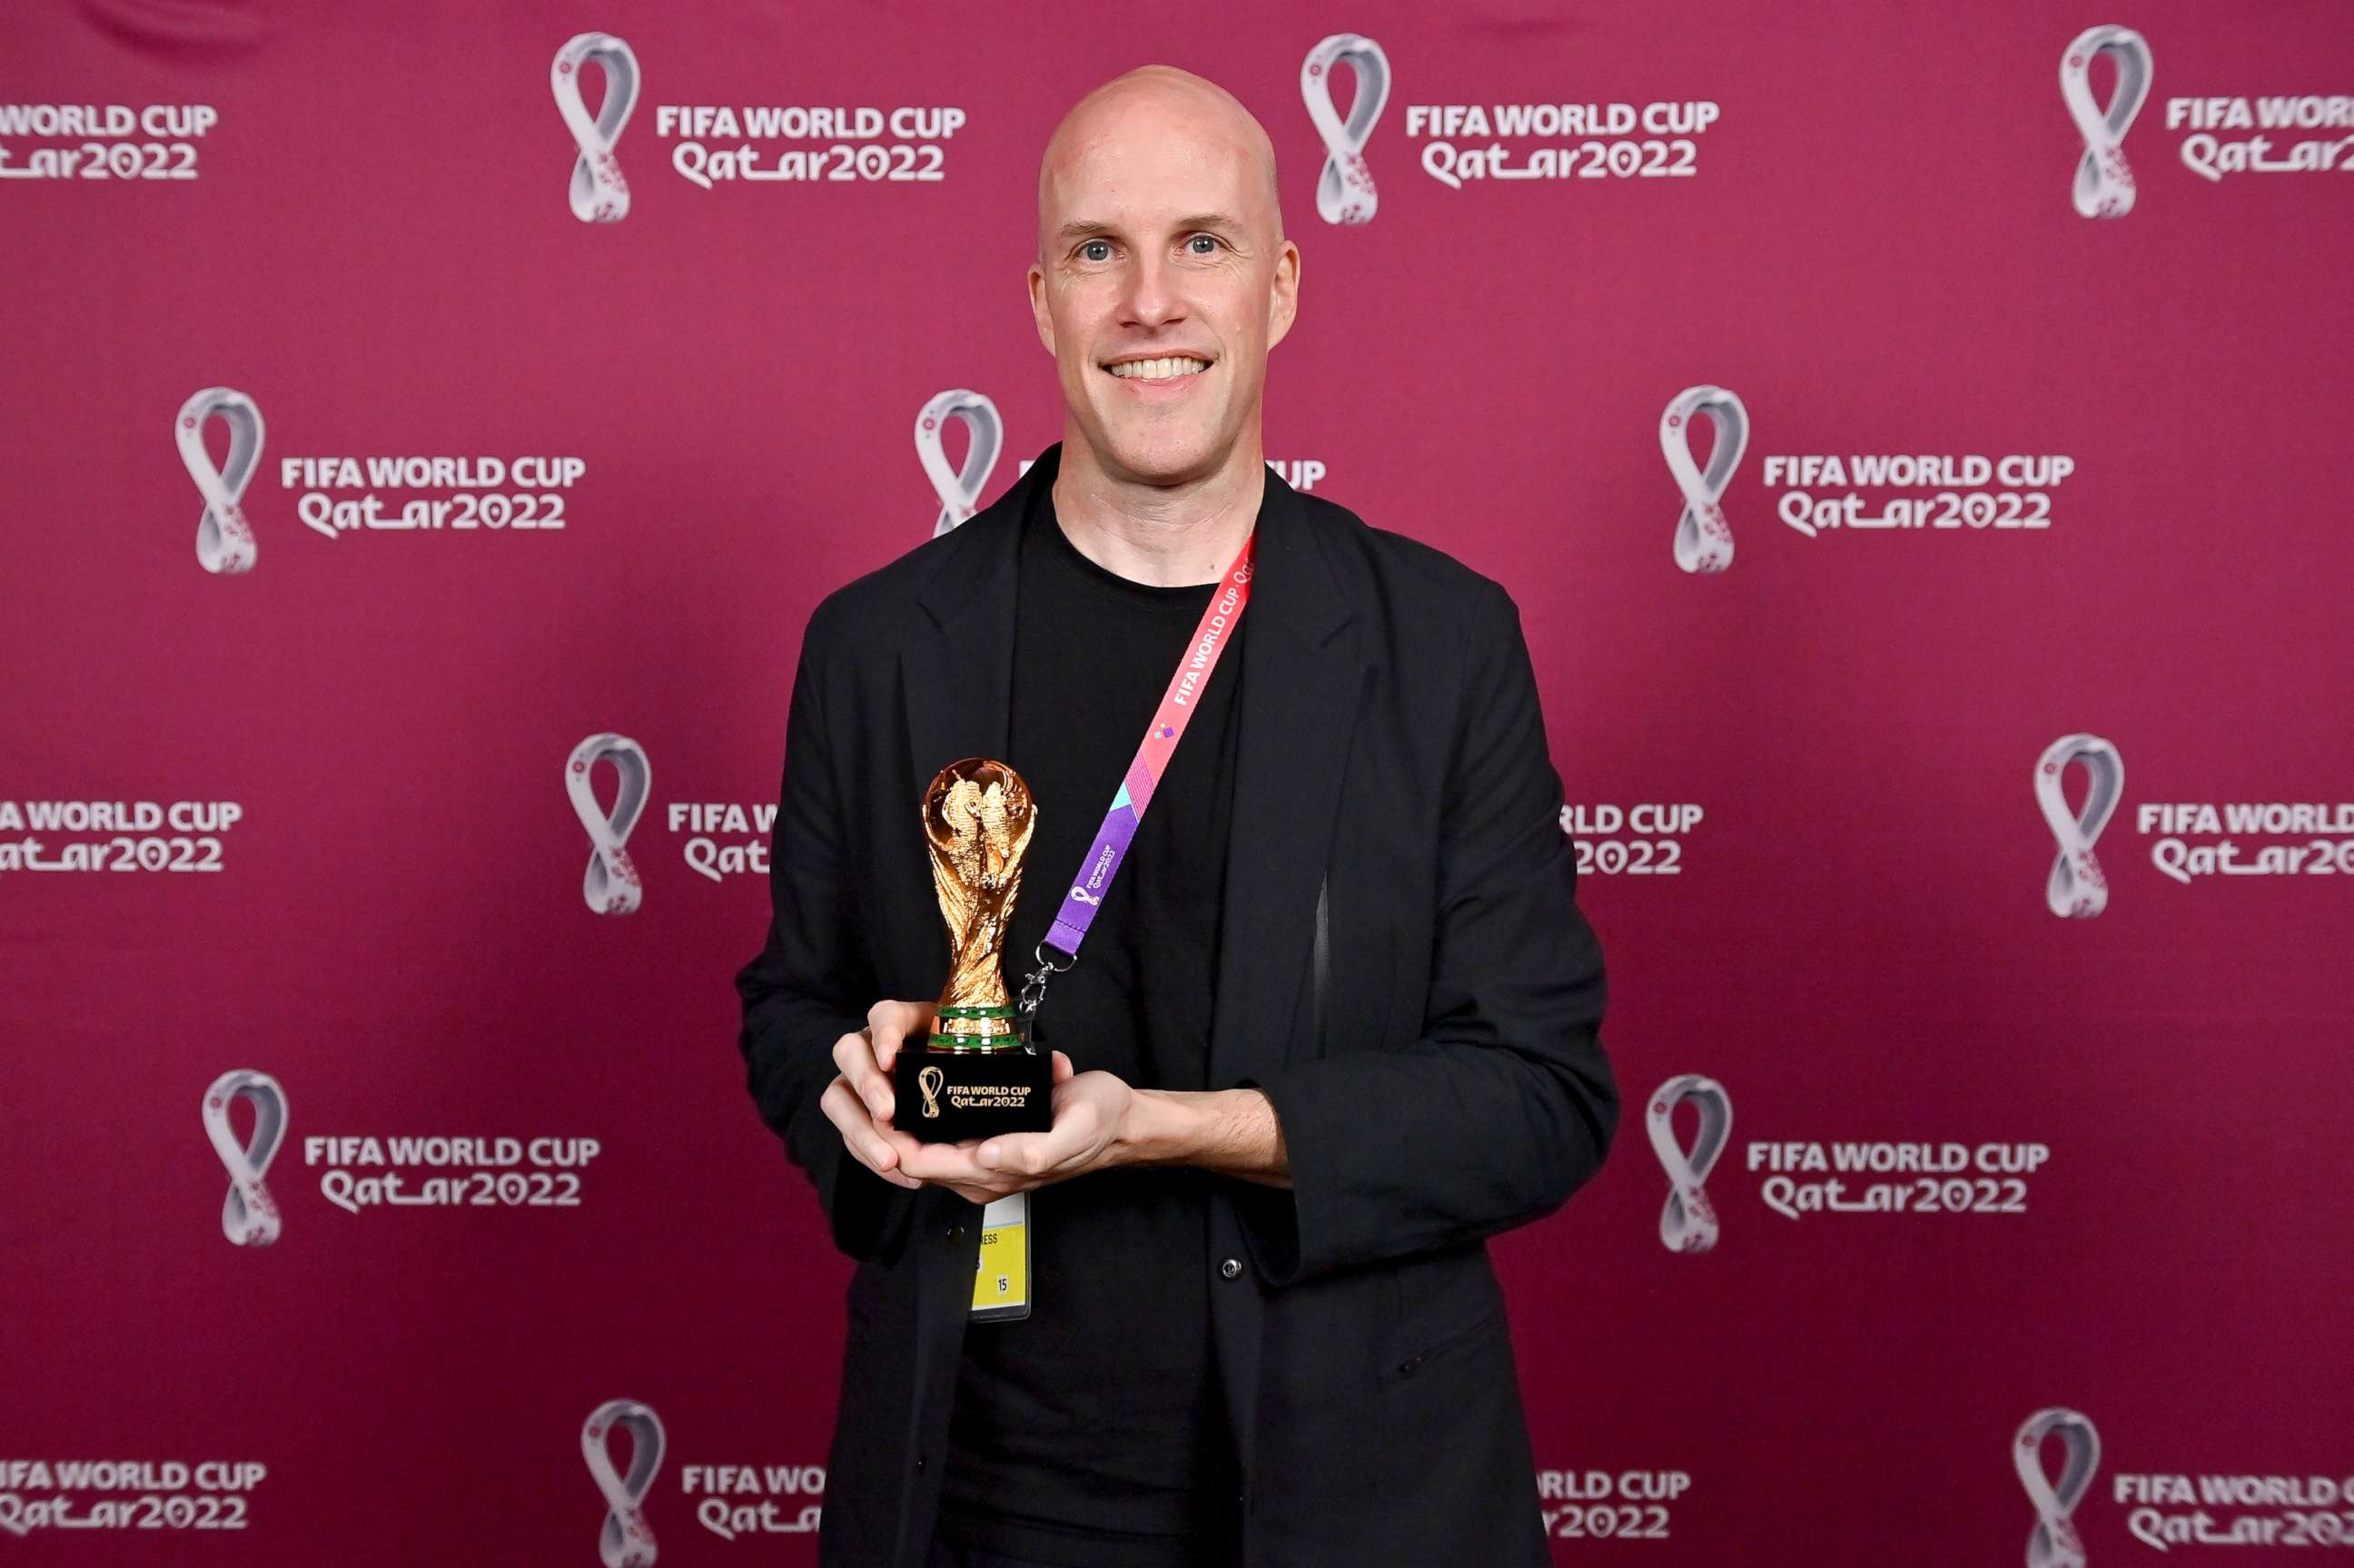 PHOTO: Grant Wahl smiles as he holds a World Cup replica trophy during an award ceremony in Doha, Qatar on Nov. 29, 2022.